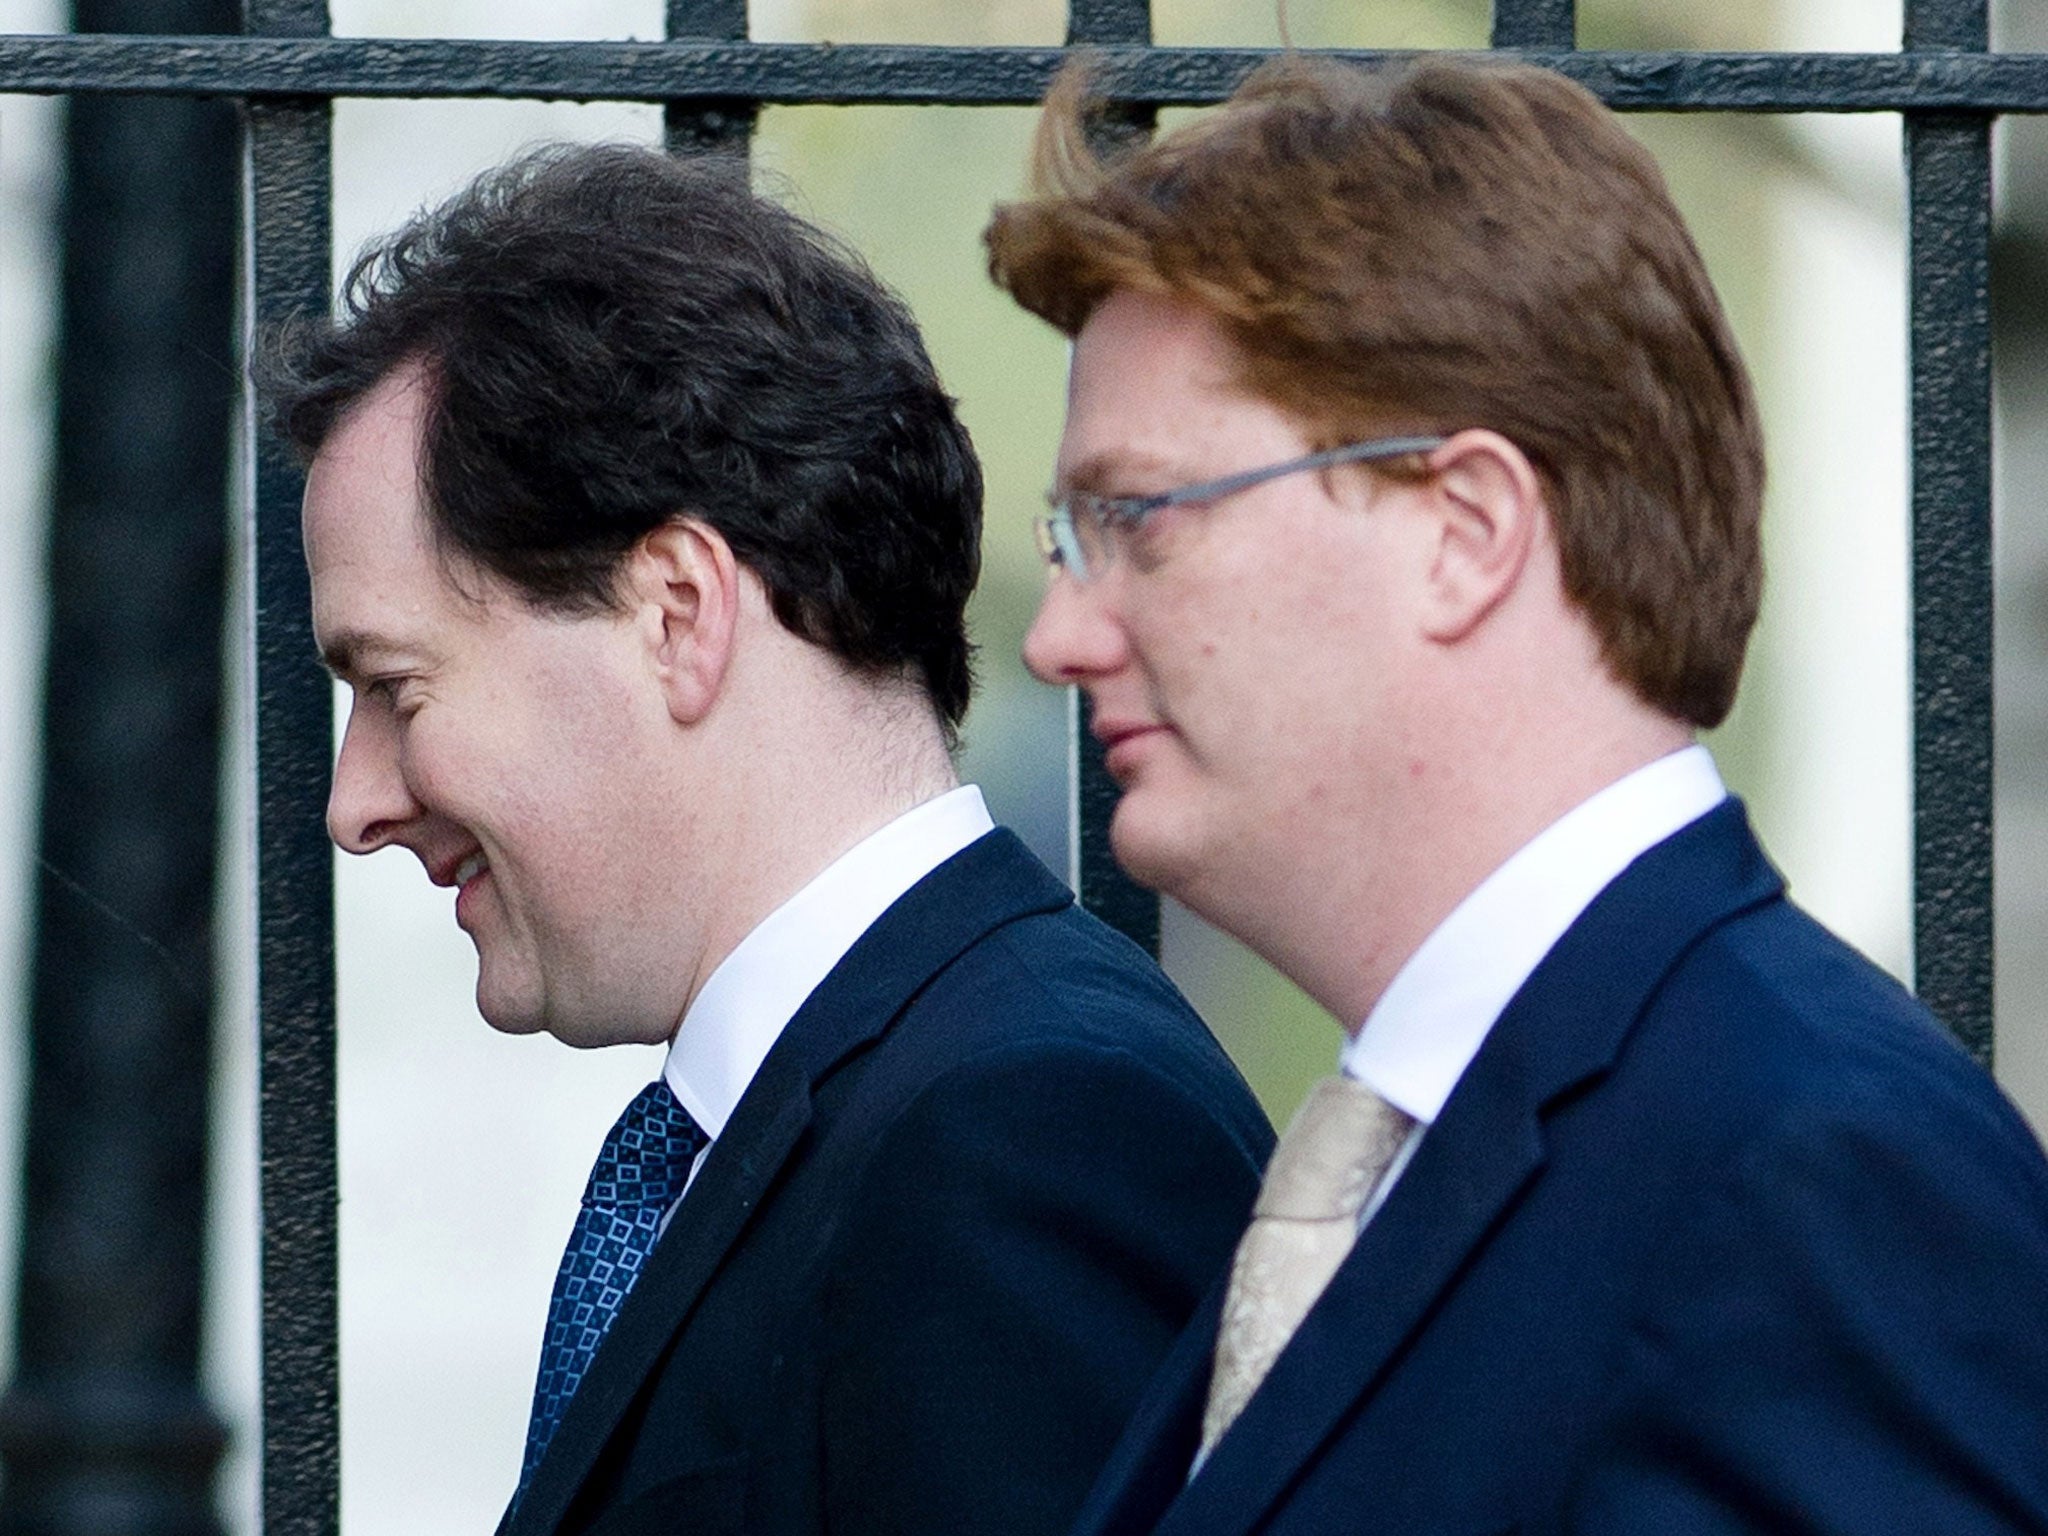 Chancellor of the Exchequer George Osborne (left) and Chief secretary to the treasury Danny Alexander leave number 11, Downing Street